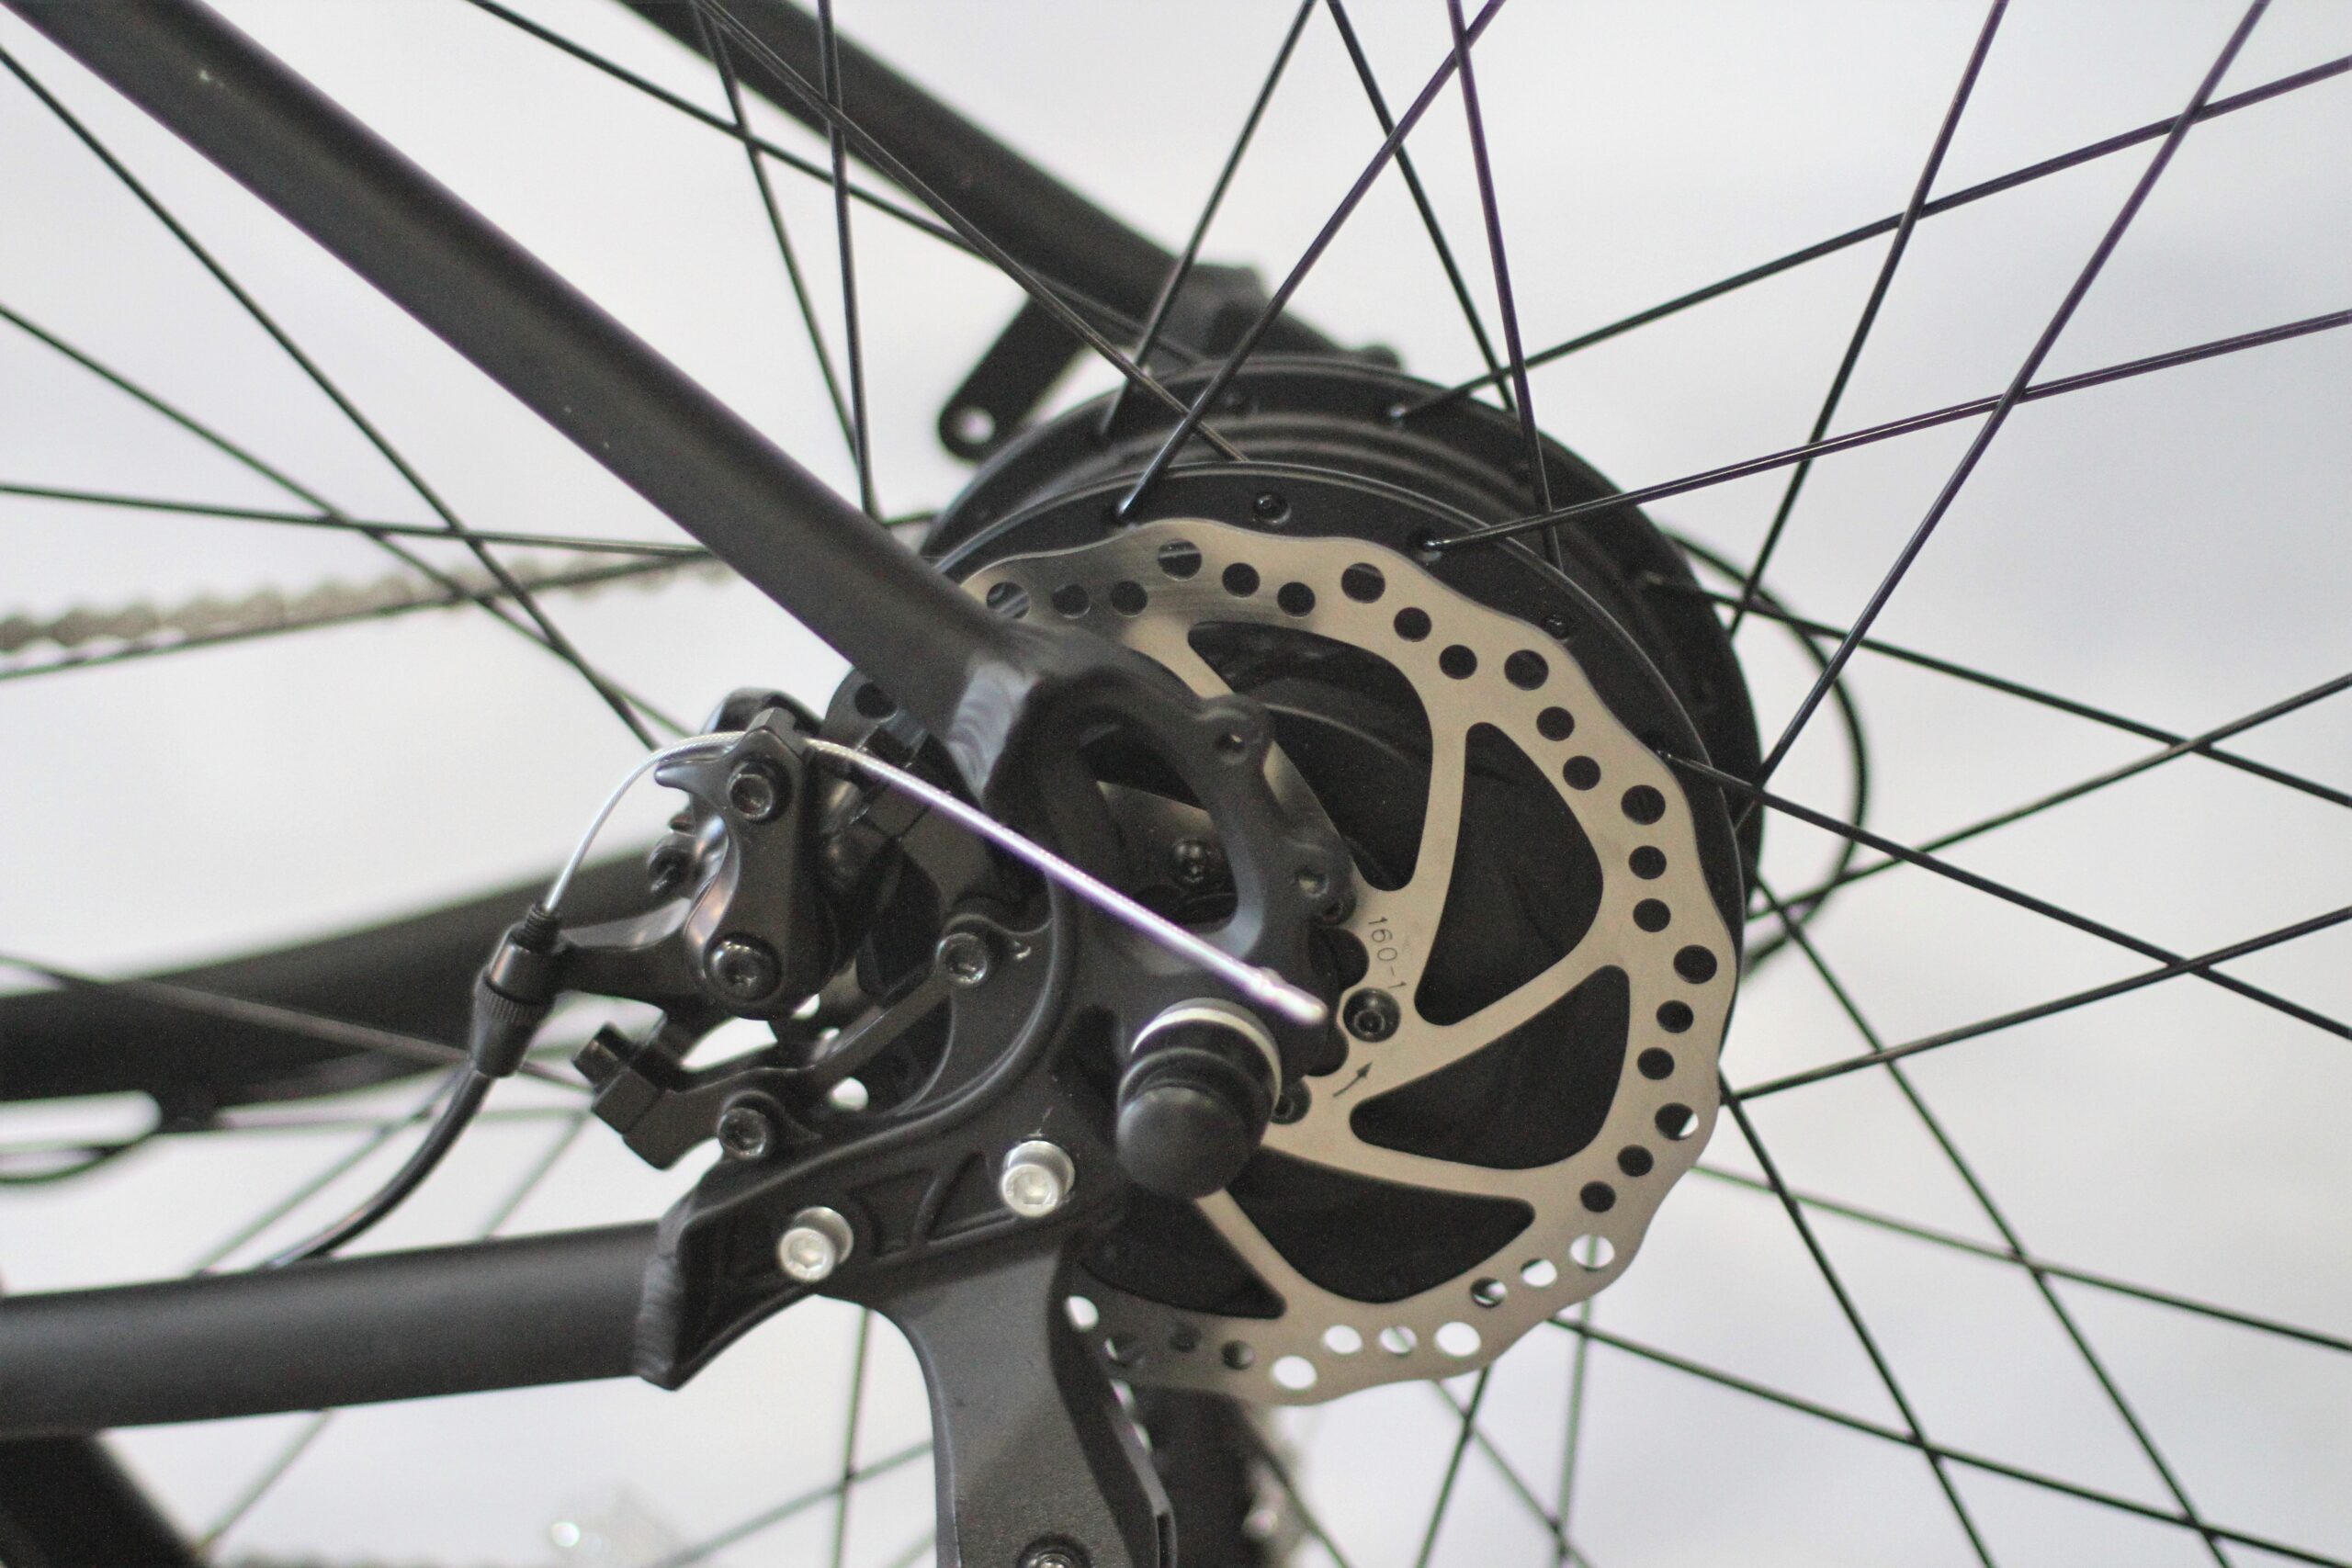 Close up of hub of bicycle wheel with spokes